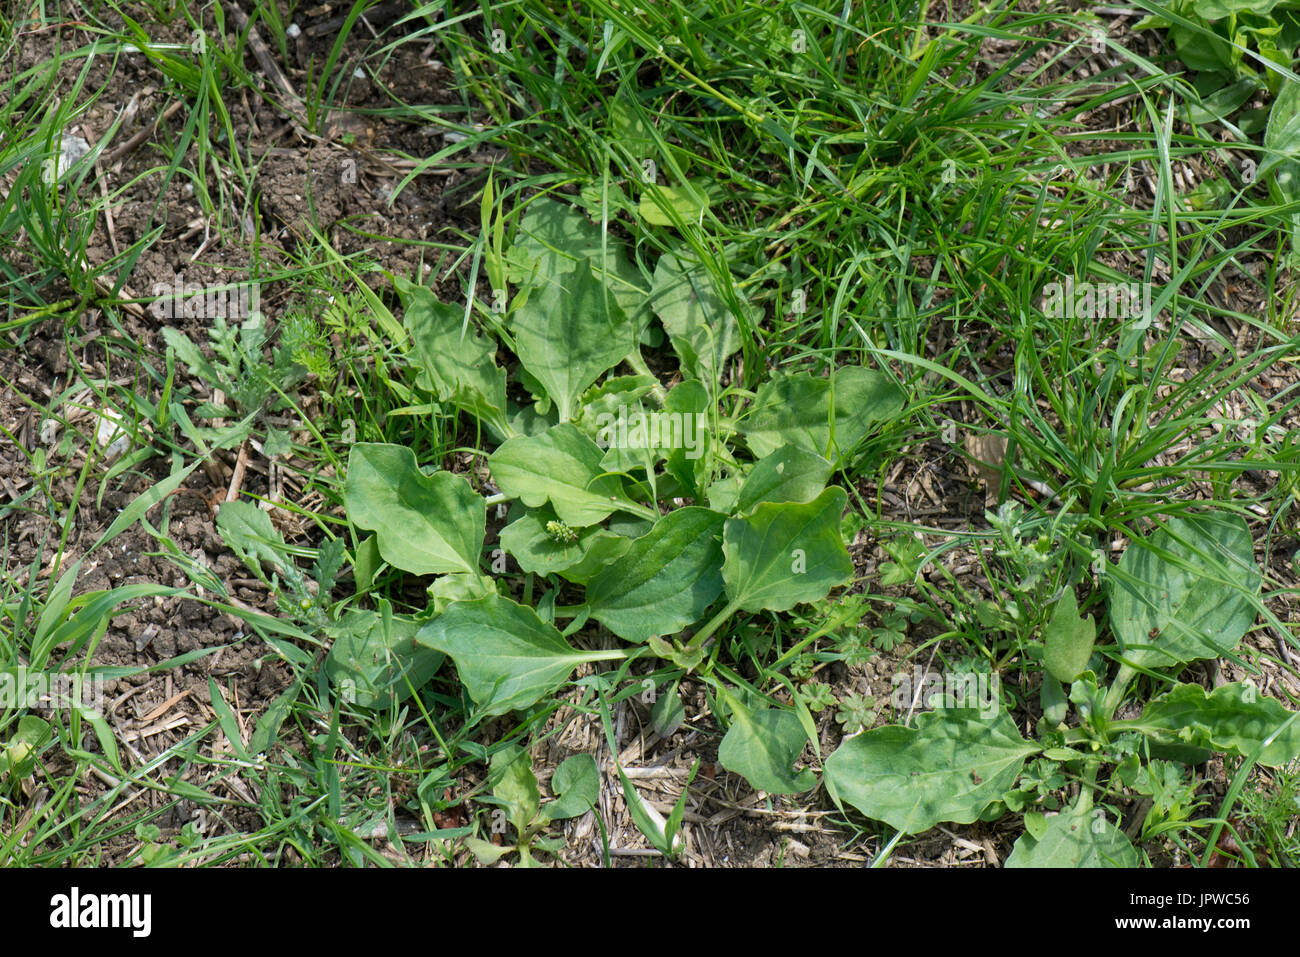 Mixed broad-leaved weeds including plantains, cranesbill, groundsel, mayweed and others germinating in a new grass ley. Stock Photo